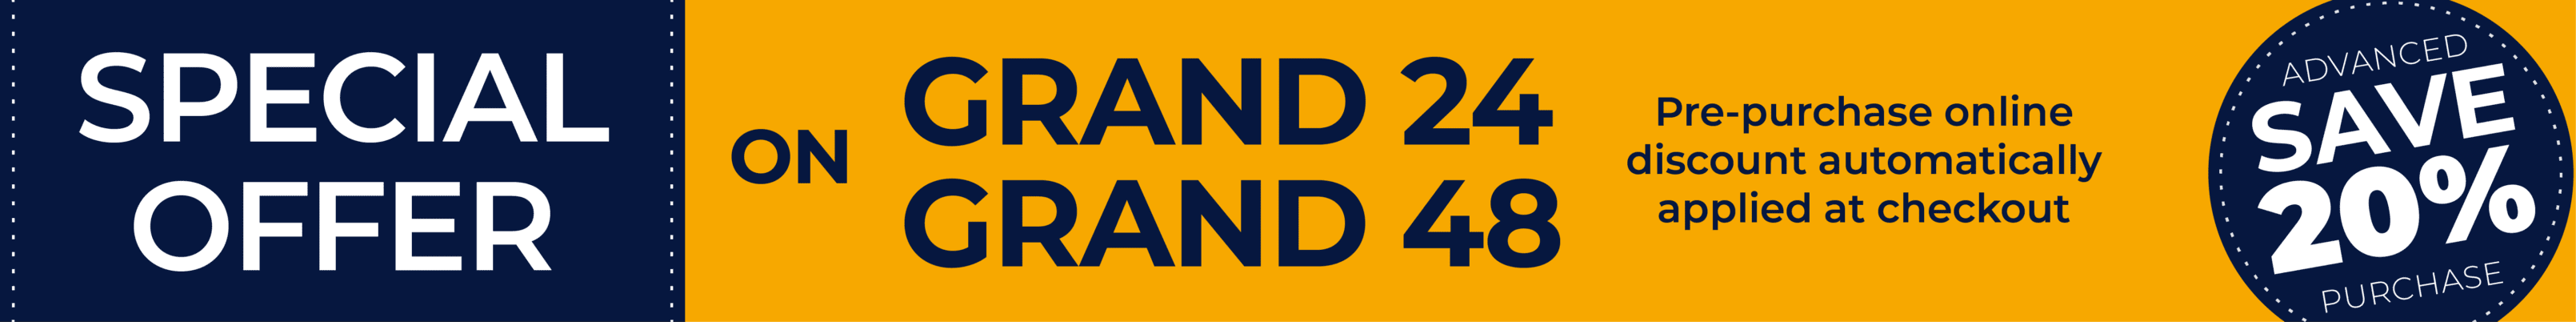 Special Offer: Save 20% on Grand 24 or Grand 48 tickets with advanced purchase. Pre-purchase online discount automatically applied at checkout.